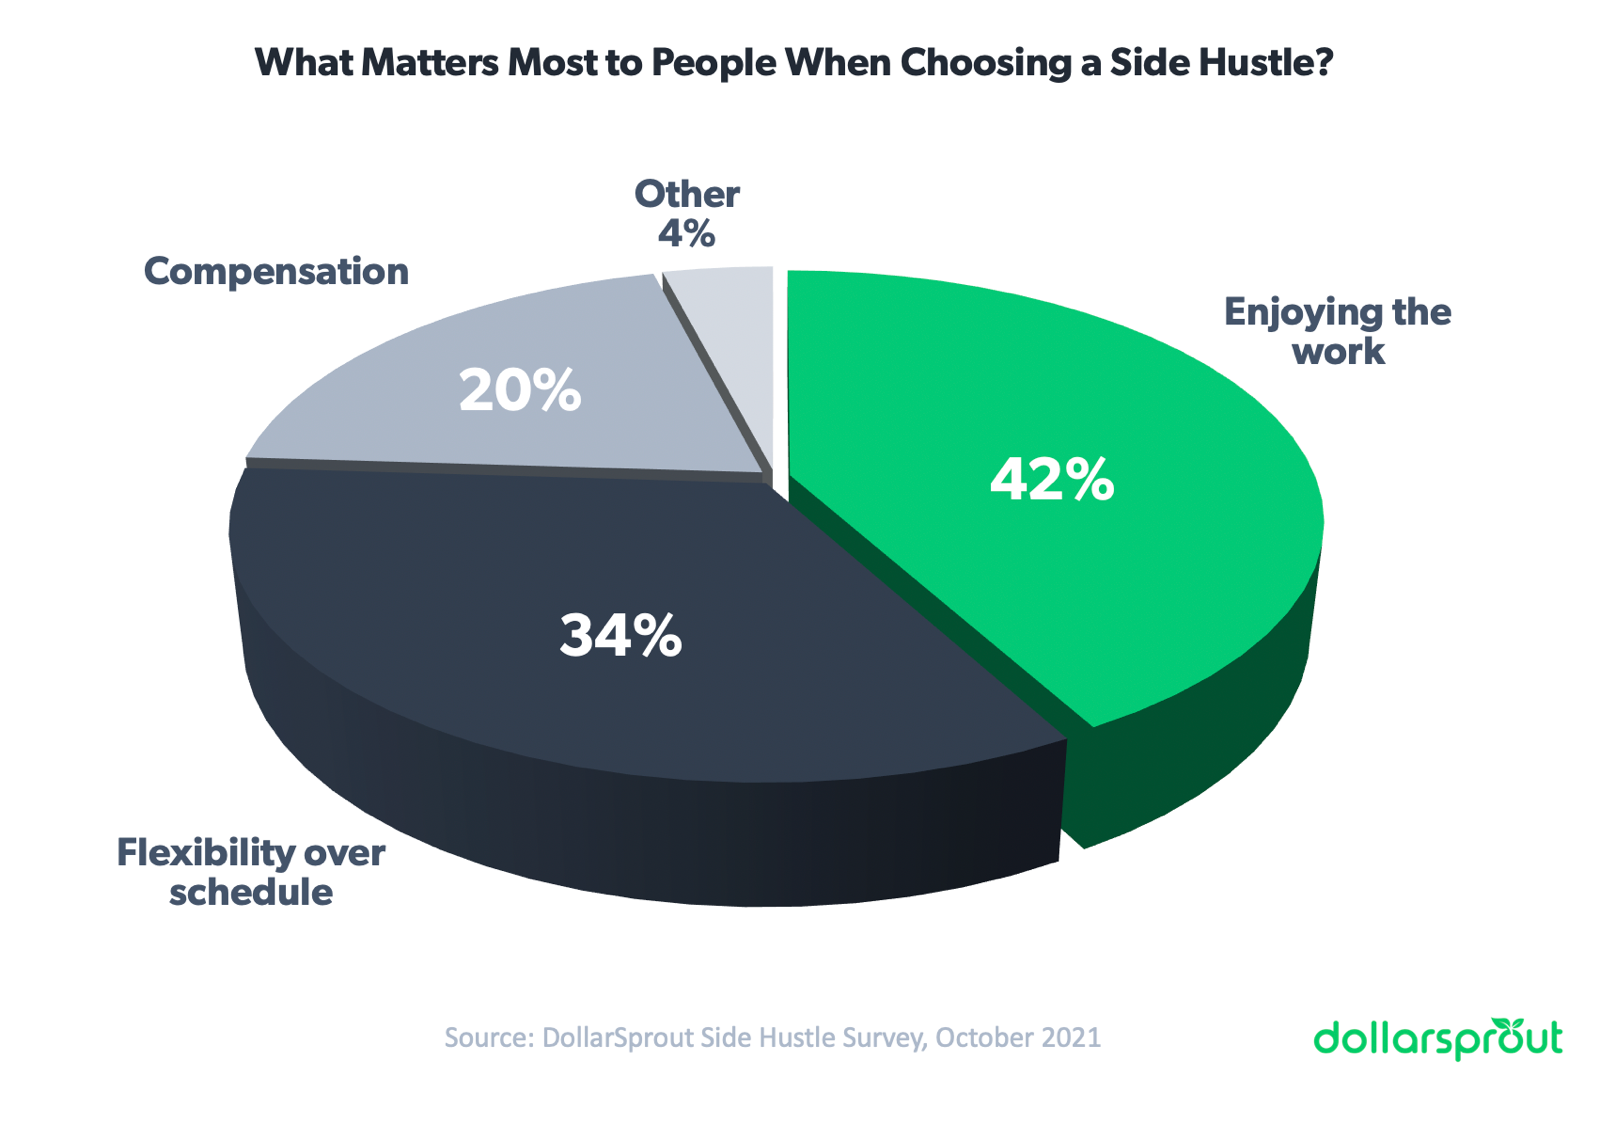 A pie chart showing that the most important thing for side scammers is to enjoy the work, followed by flexibility over time.  Compensation was ranked the 3rd most important factor.